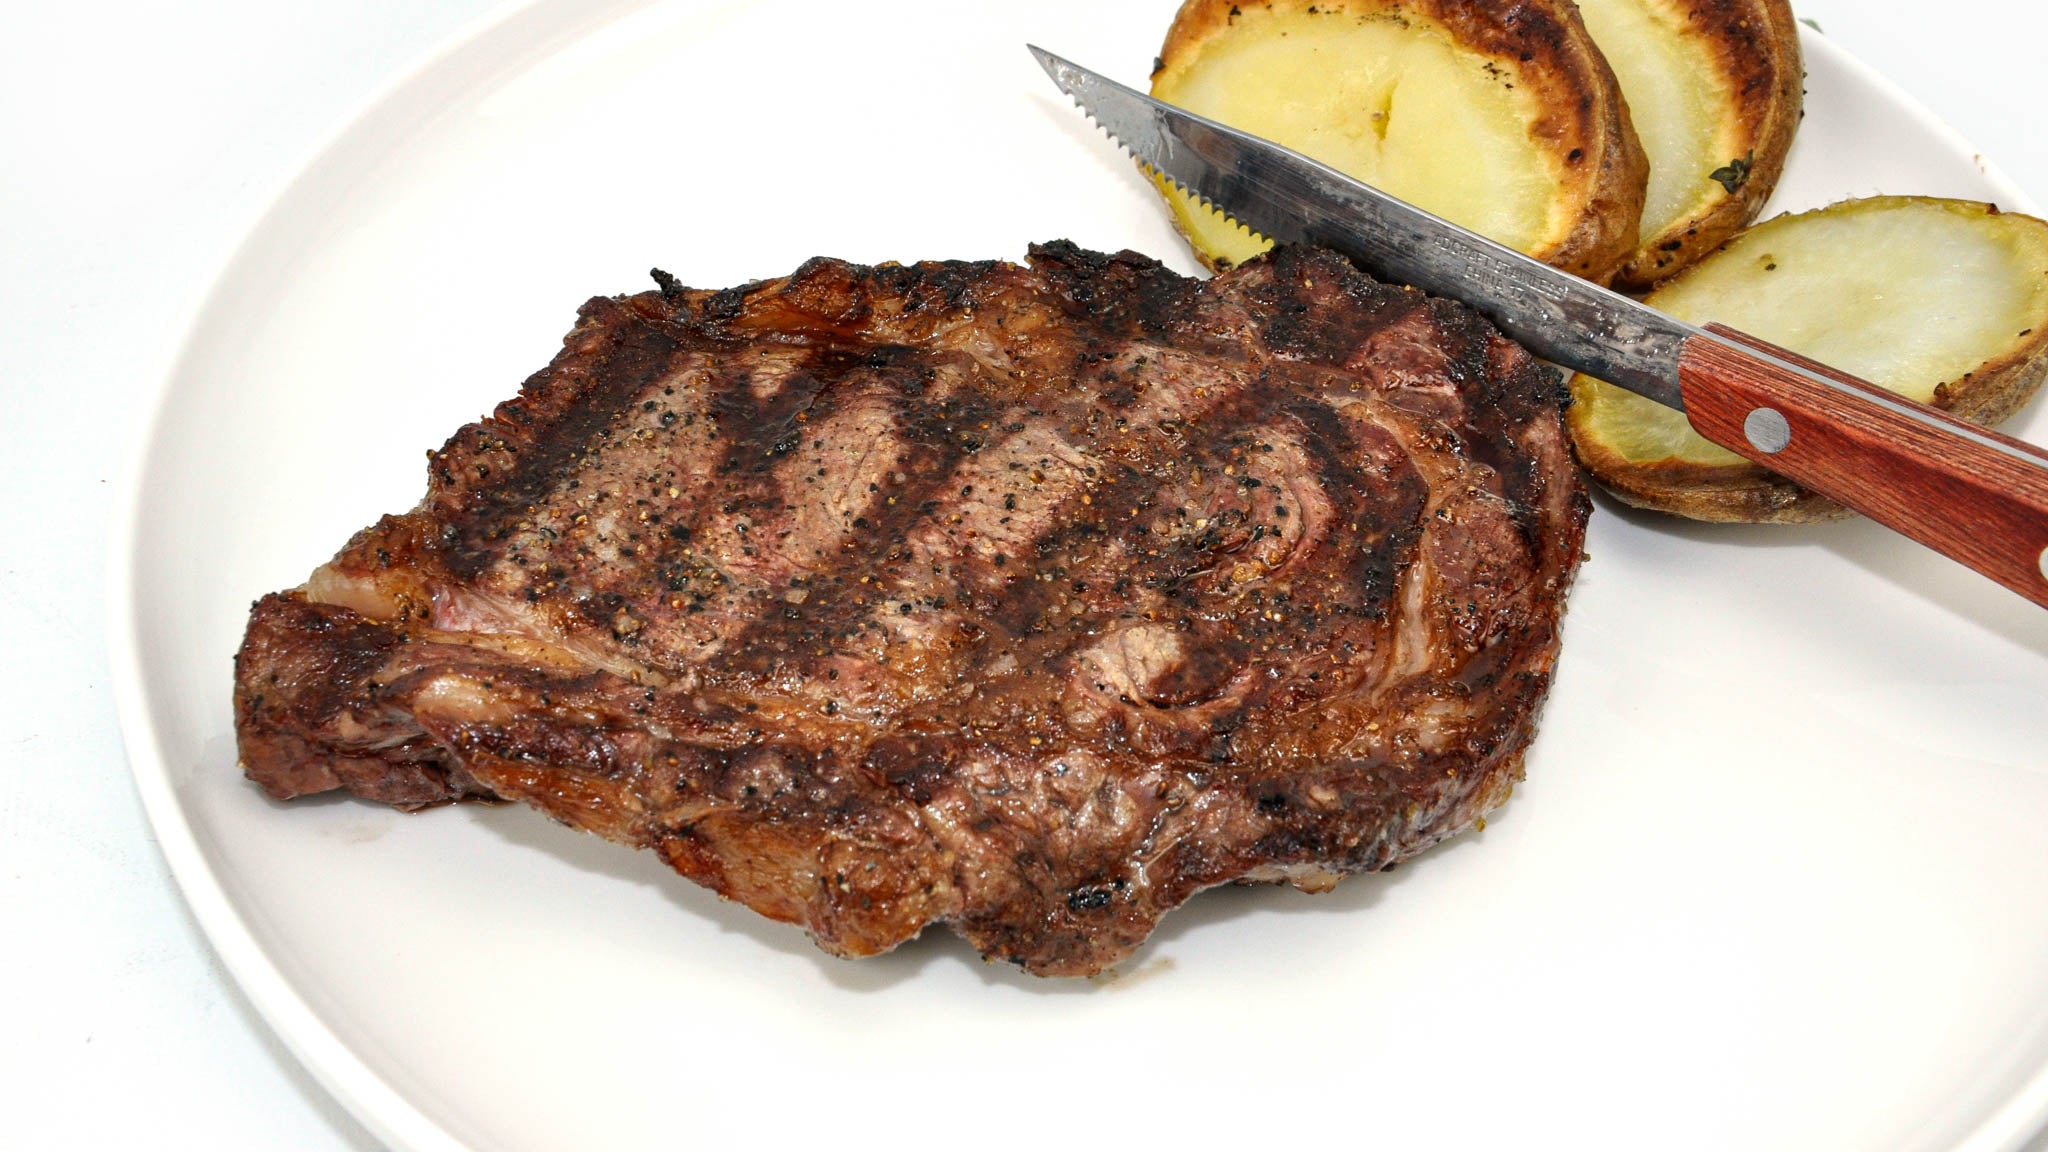 Strip & Ribeye Collection – Certified Angus Beef Steaks